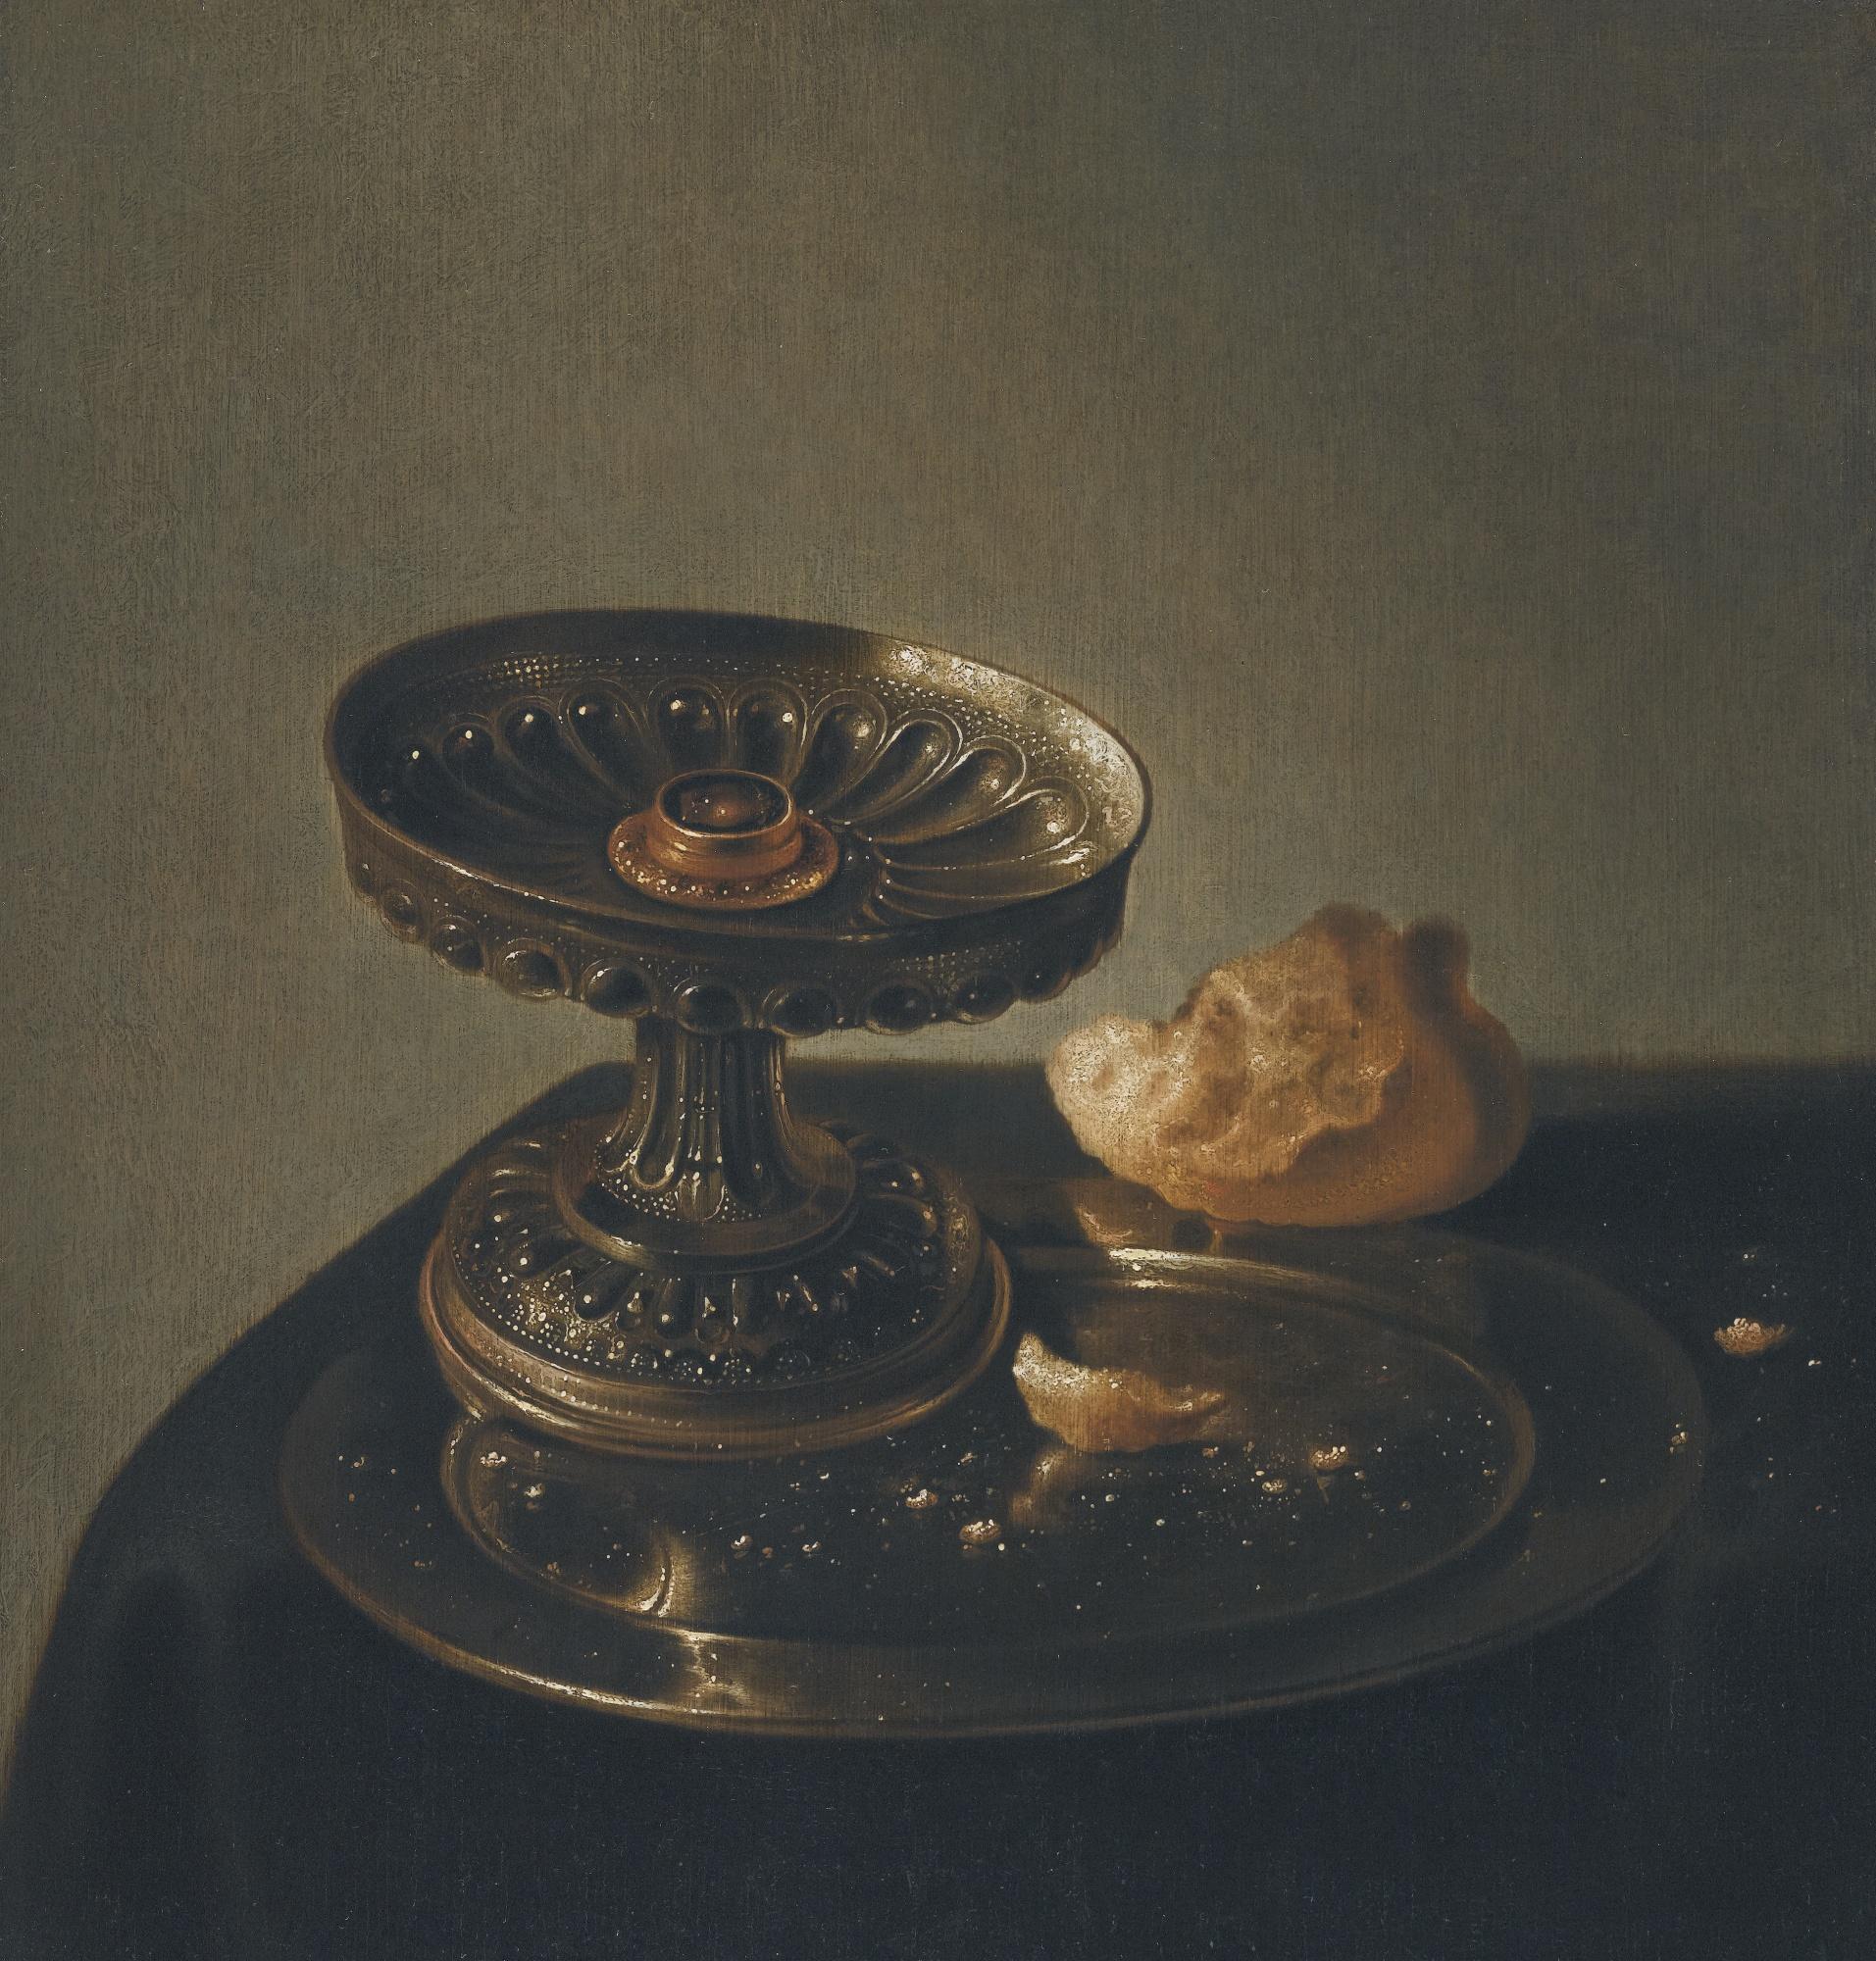 Still Life With A Tazza And Bread Roll On A Pewter Plate On A Draped Ledge  by Jan Jansz. Den Uyl The Elder